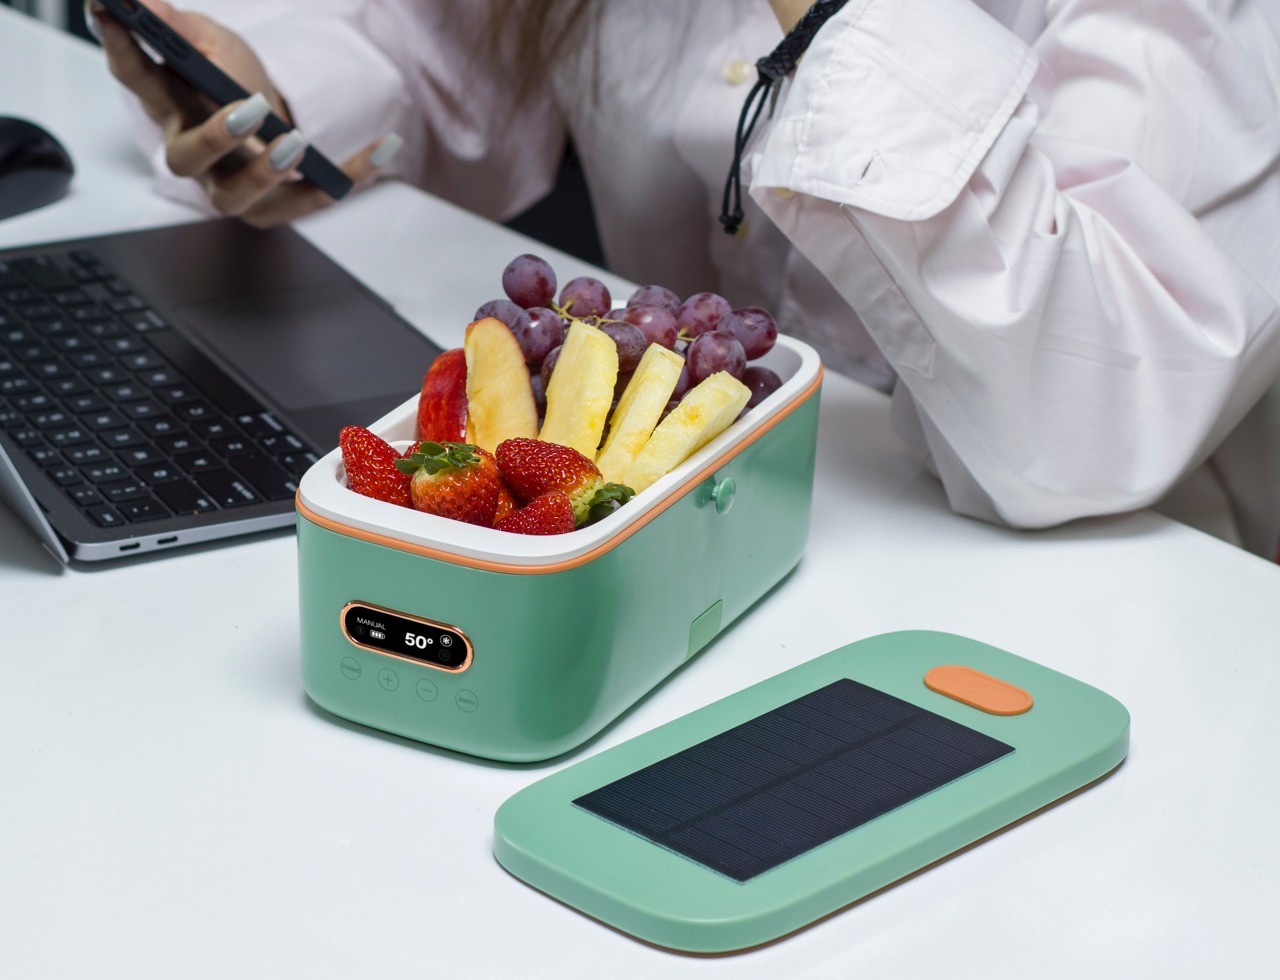 https://www.yankodesign.com/images/design_news/2022/06/solar-powered_self_heating_and_cooling_lunchvbox_03.jpg